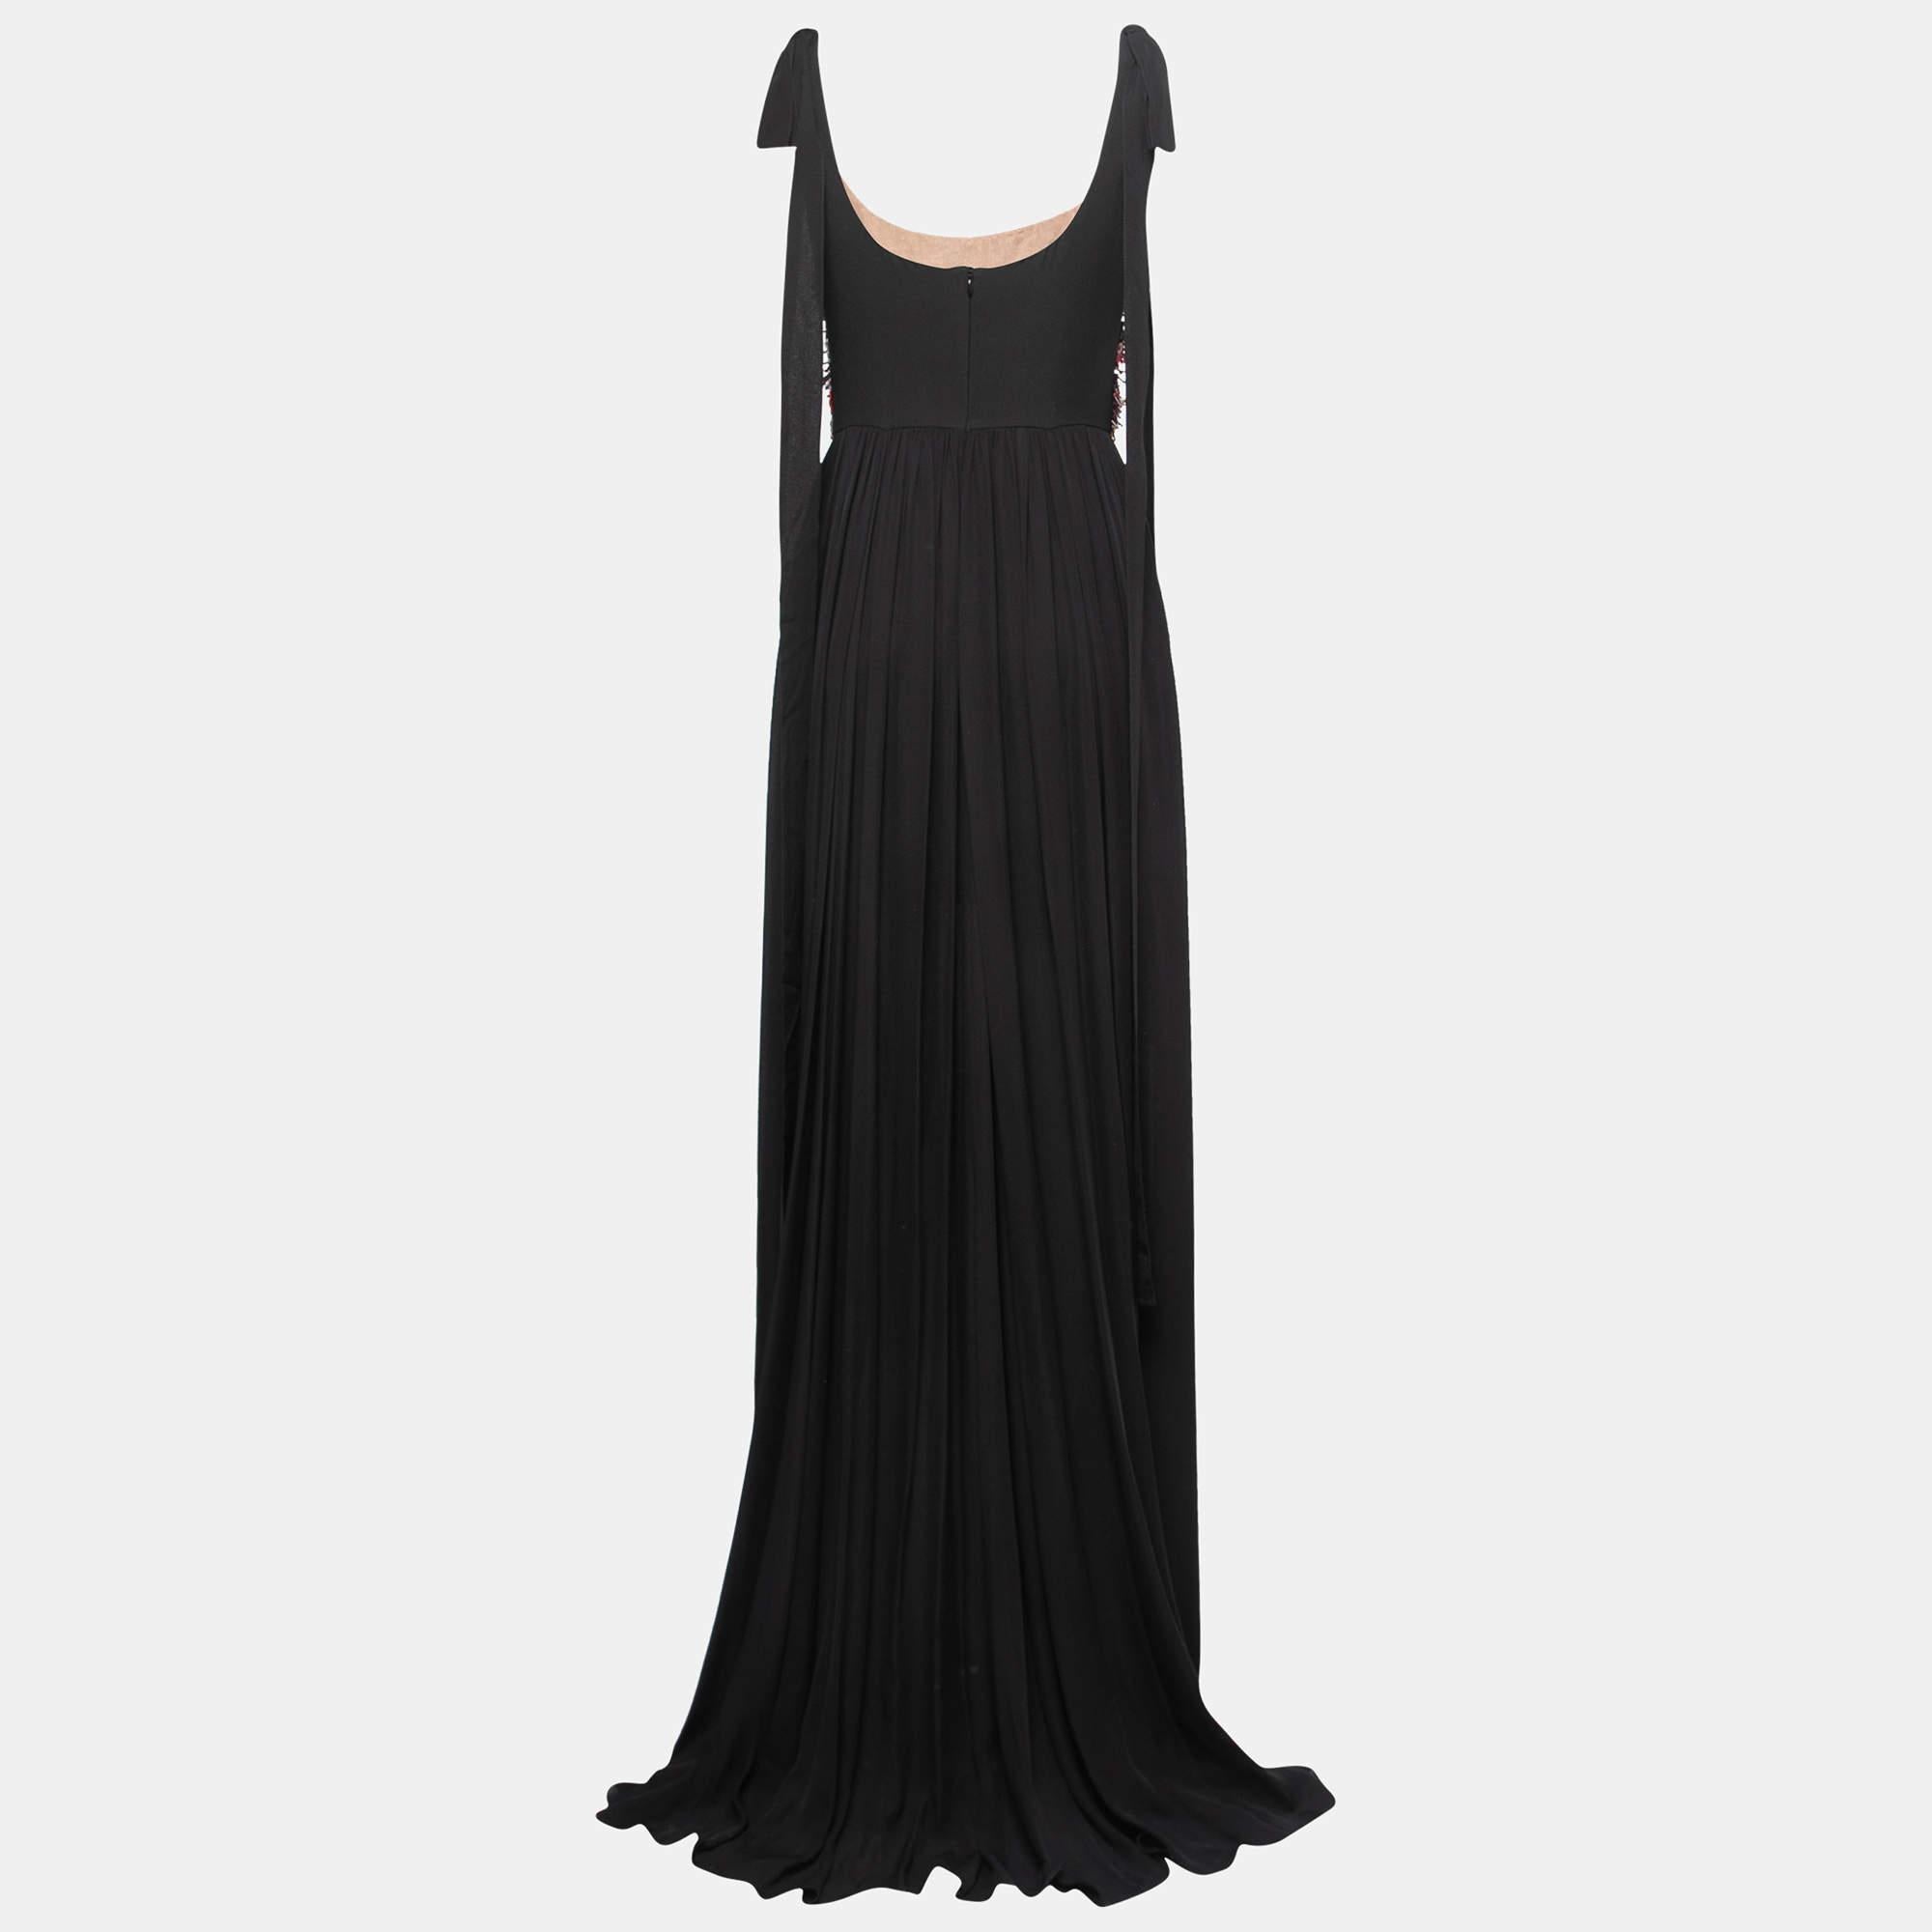 For all evening soirées and high-affair parties, a gown like this makes sure you look the best of all. Tailored into a superb fit and style, this Elie Saab gown is elevated with a stunning neckline and a beautiful hue. Bring home this lovely gown